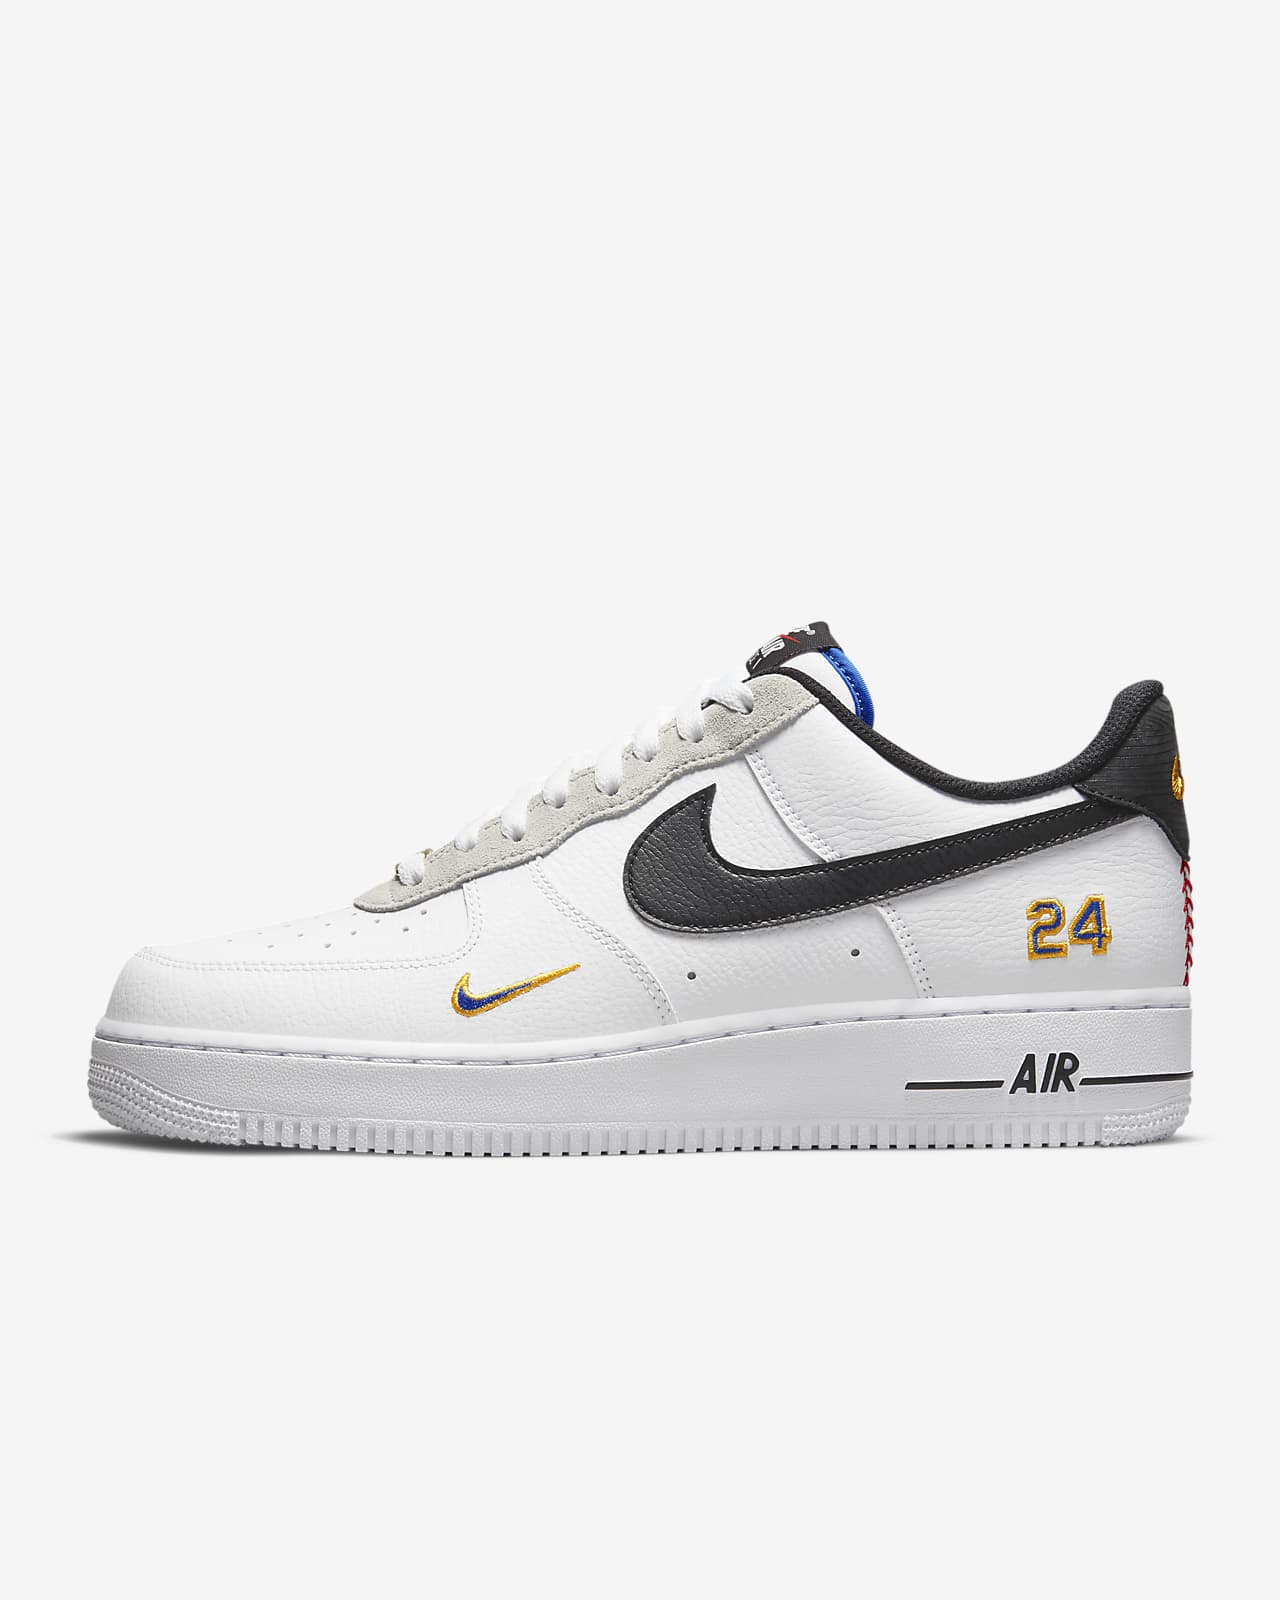 Release Reminder – Nike Air Force 1 ’07 LV8 ‘Griffey’